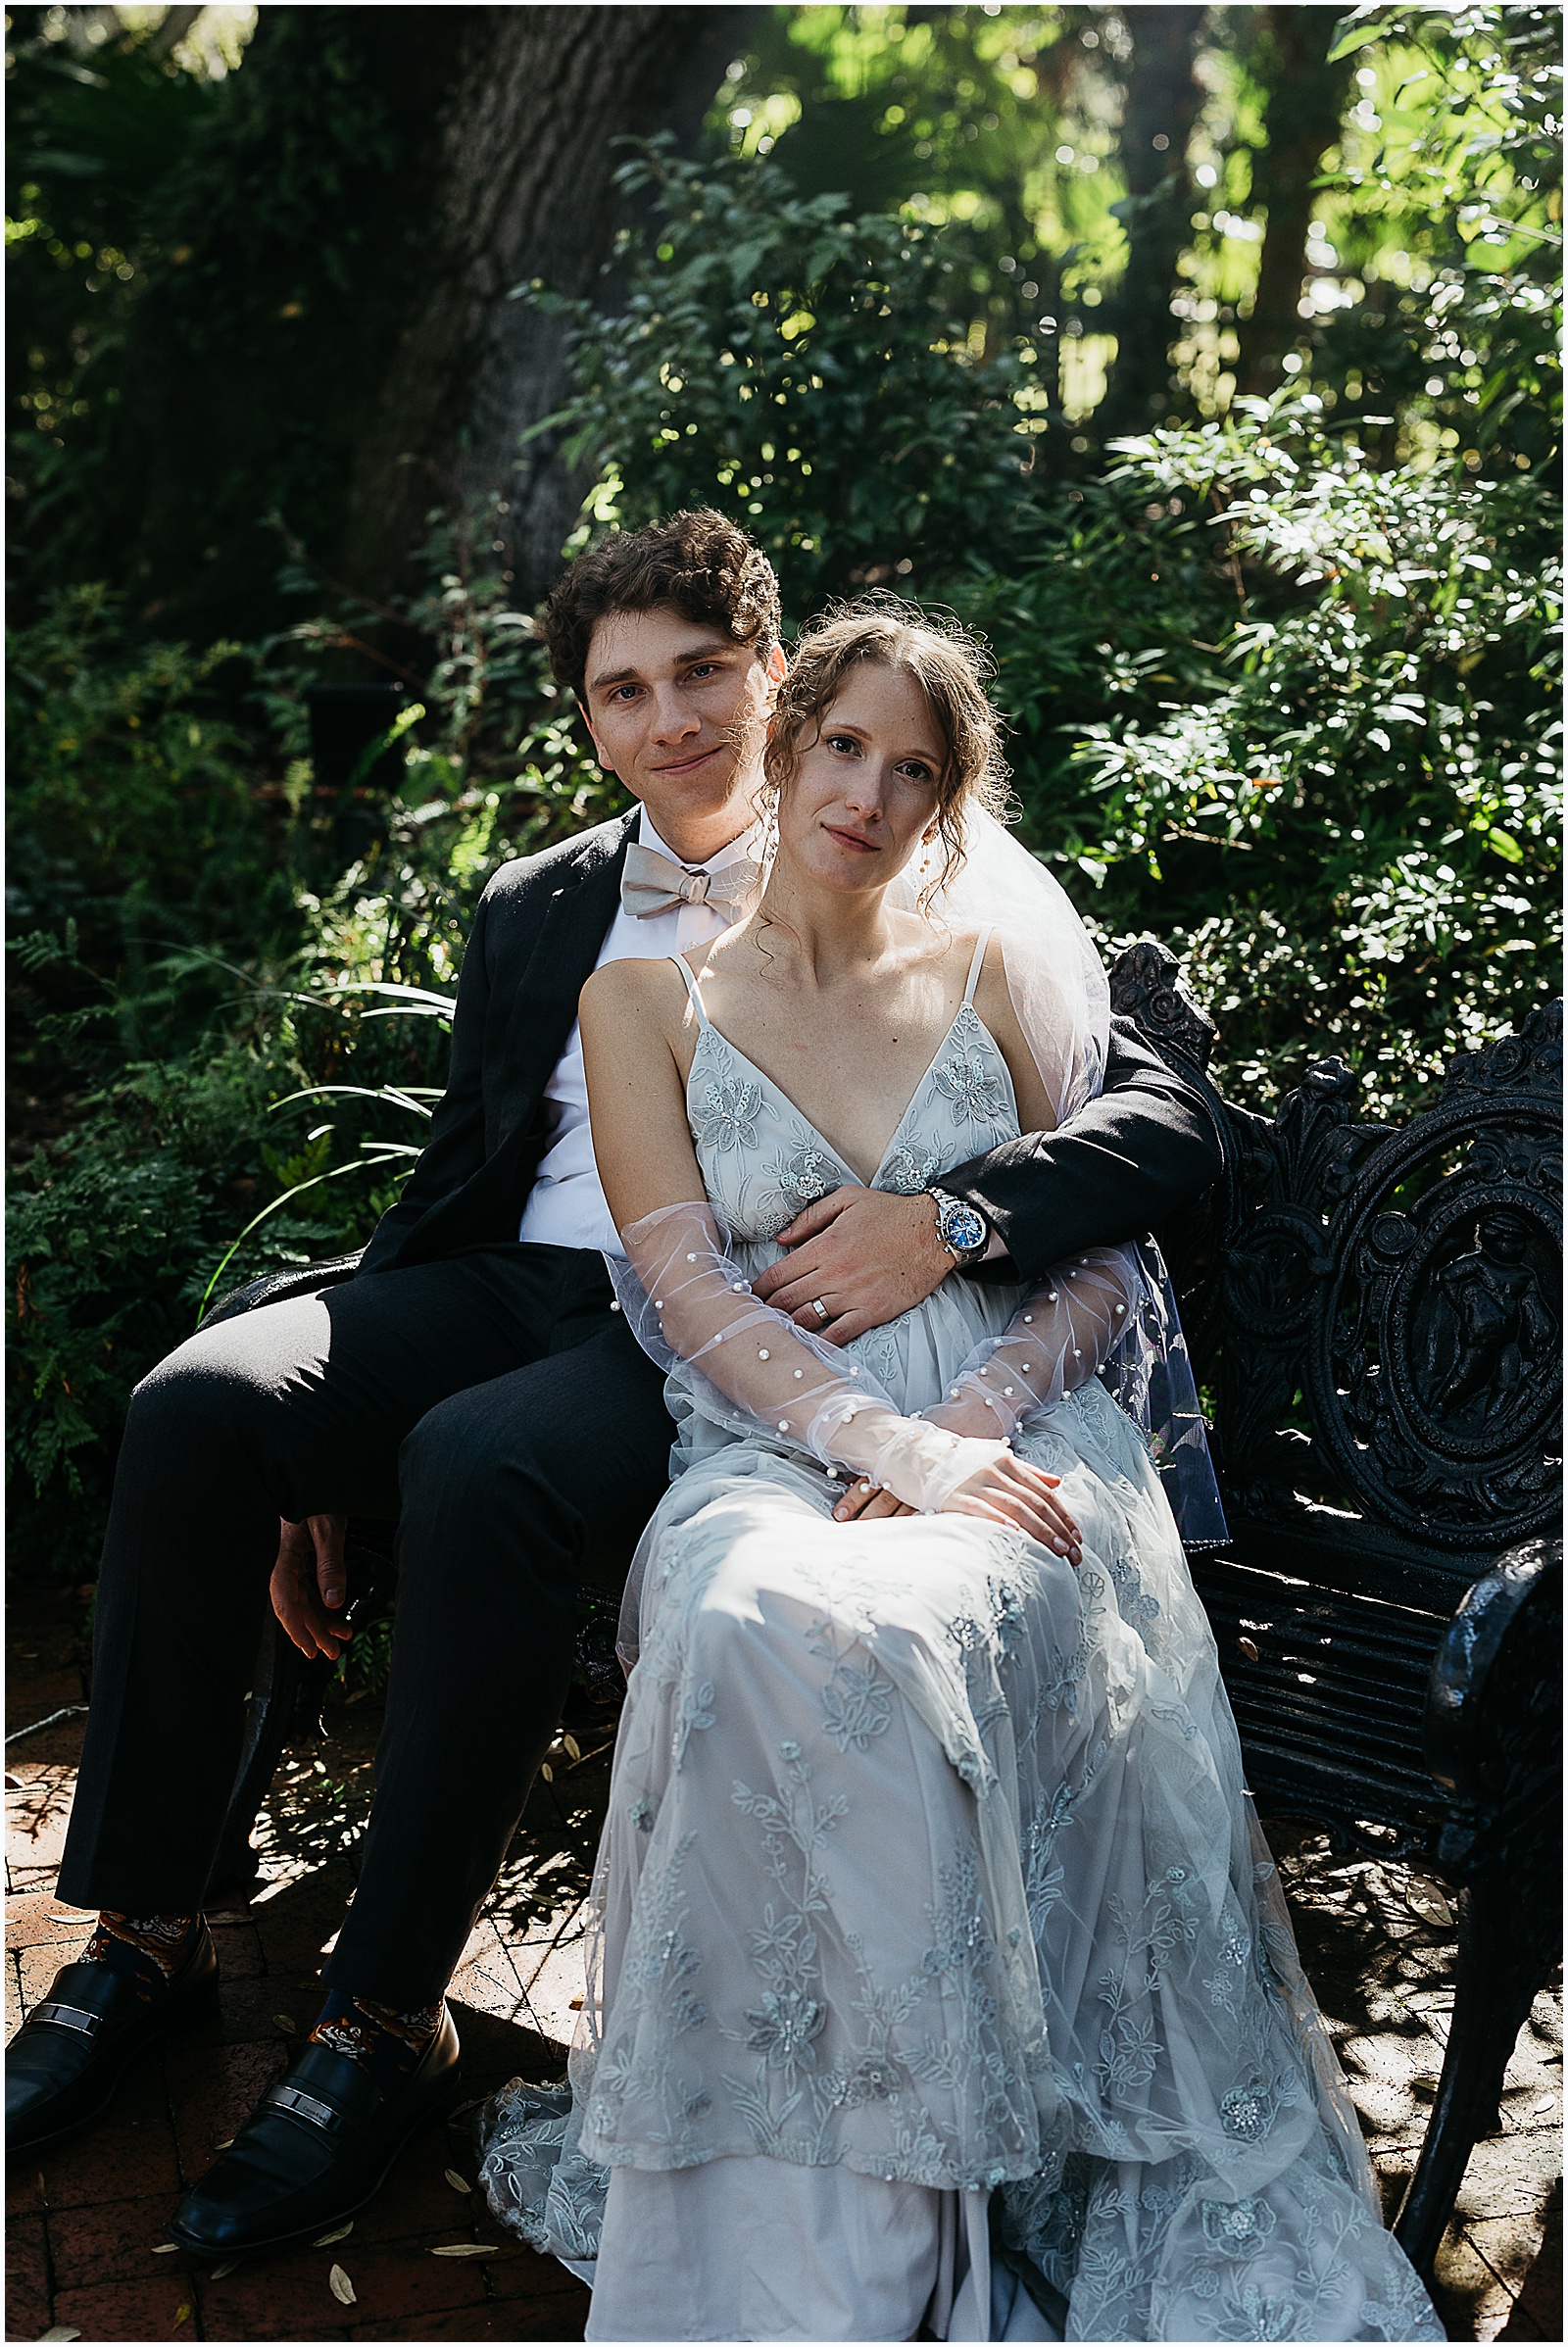 A bride and groom pose for winter wedding photos in a New Orleans garden.